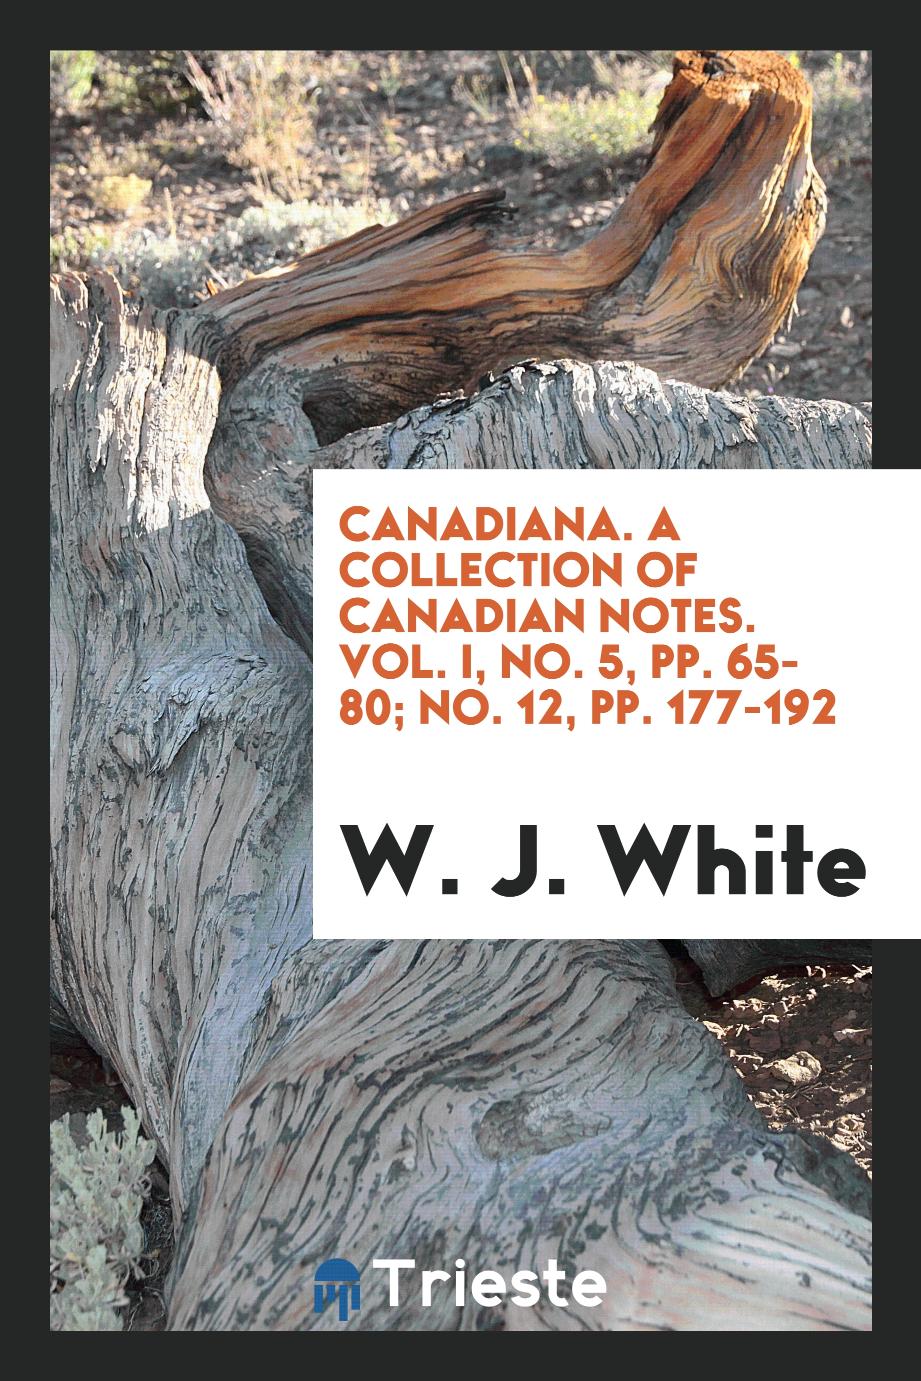 Canadiana. A collection of Canadian notes. Vol. I, No. 5, pp. 65-80; No. 12, pp. 177-192